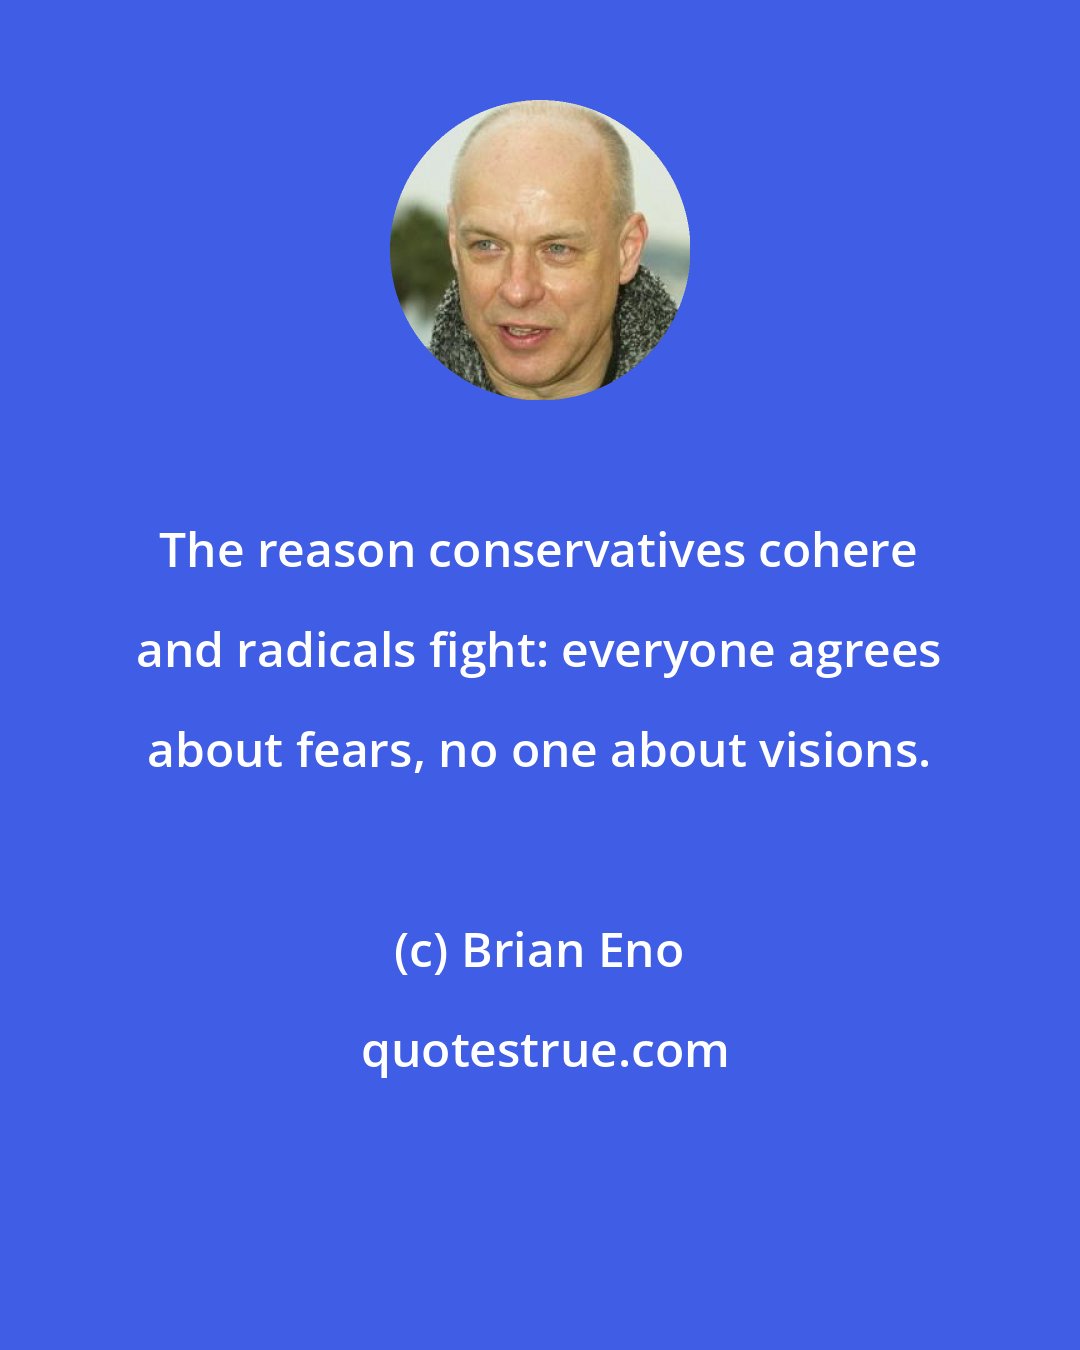 Brian Eno: The reason conservatives cohere and radicals fight: everyone agrees about fears, no one about visions.